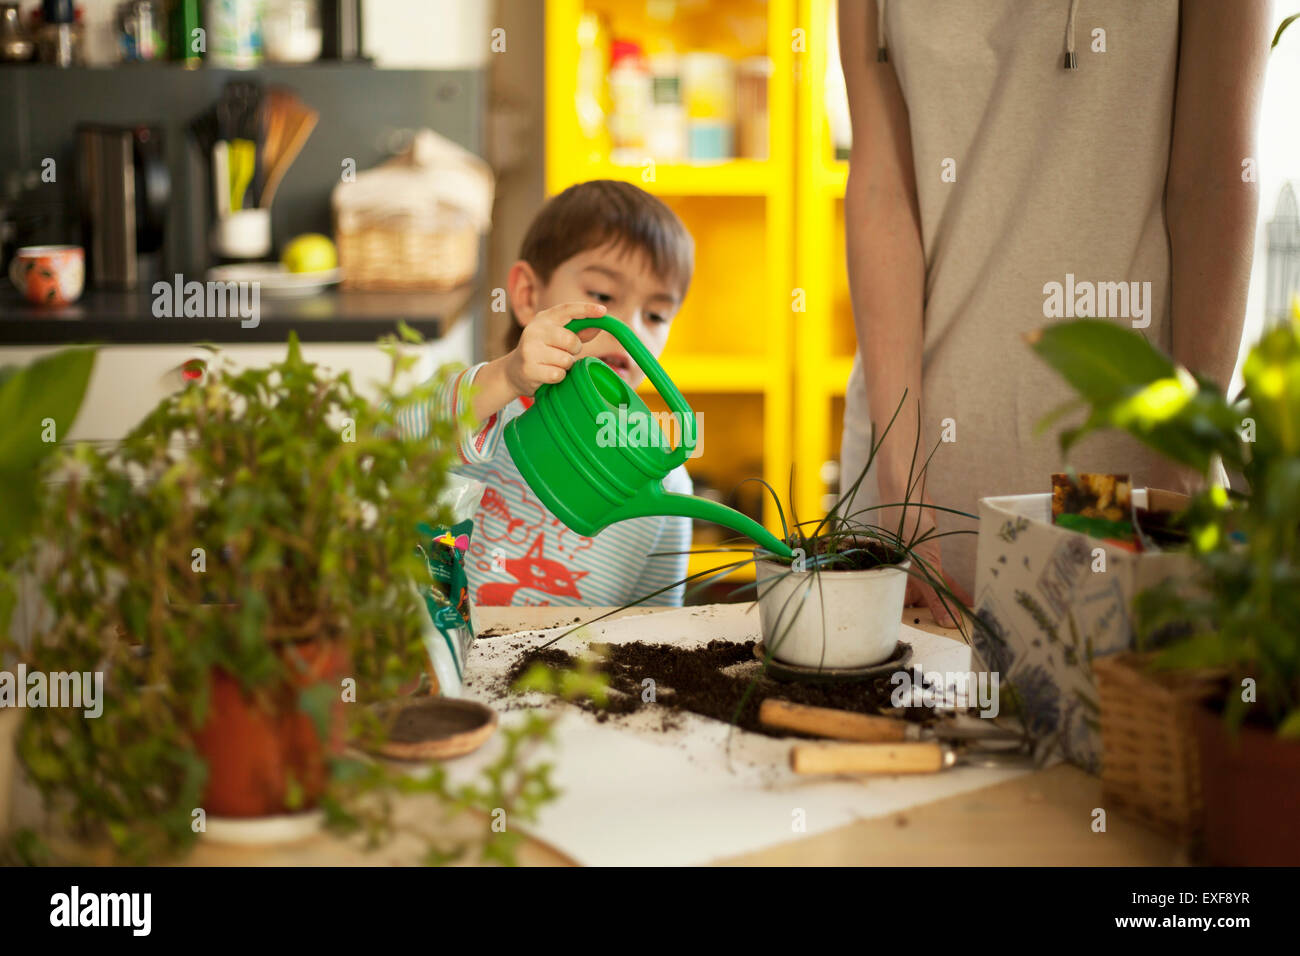 Boy watering pot plants at kitchen table Stock Photo